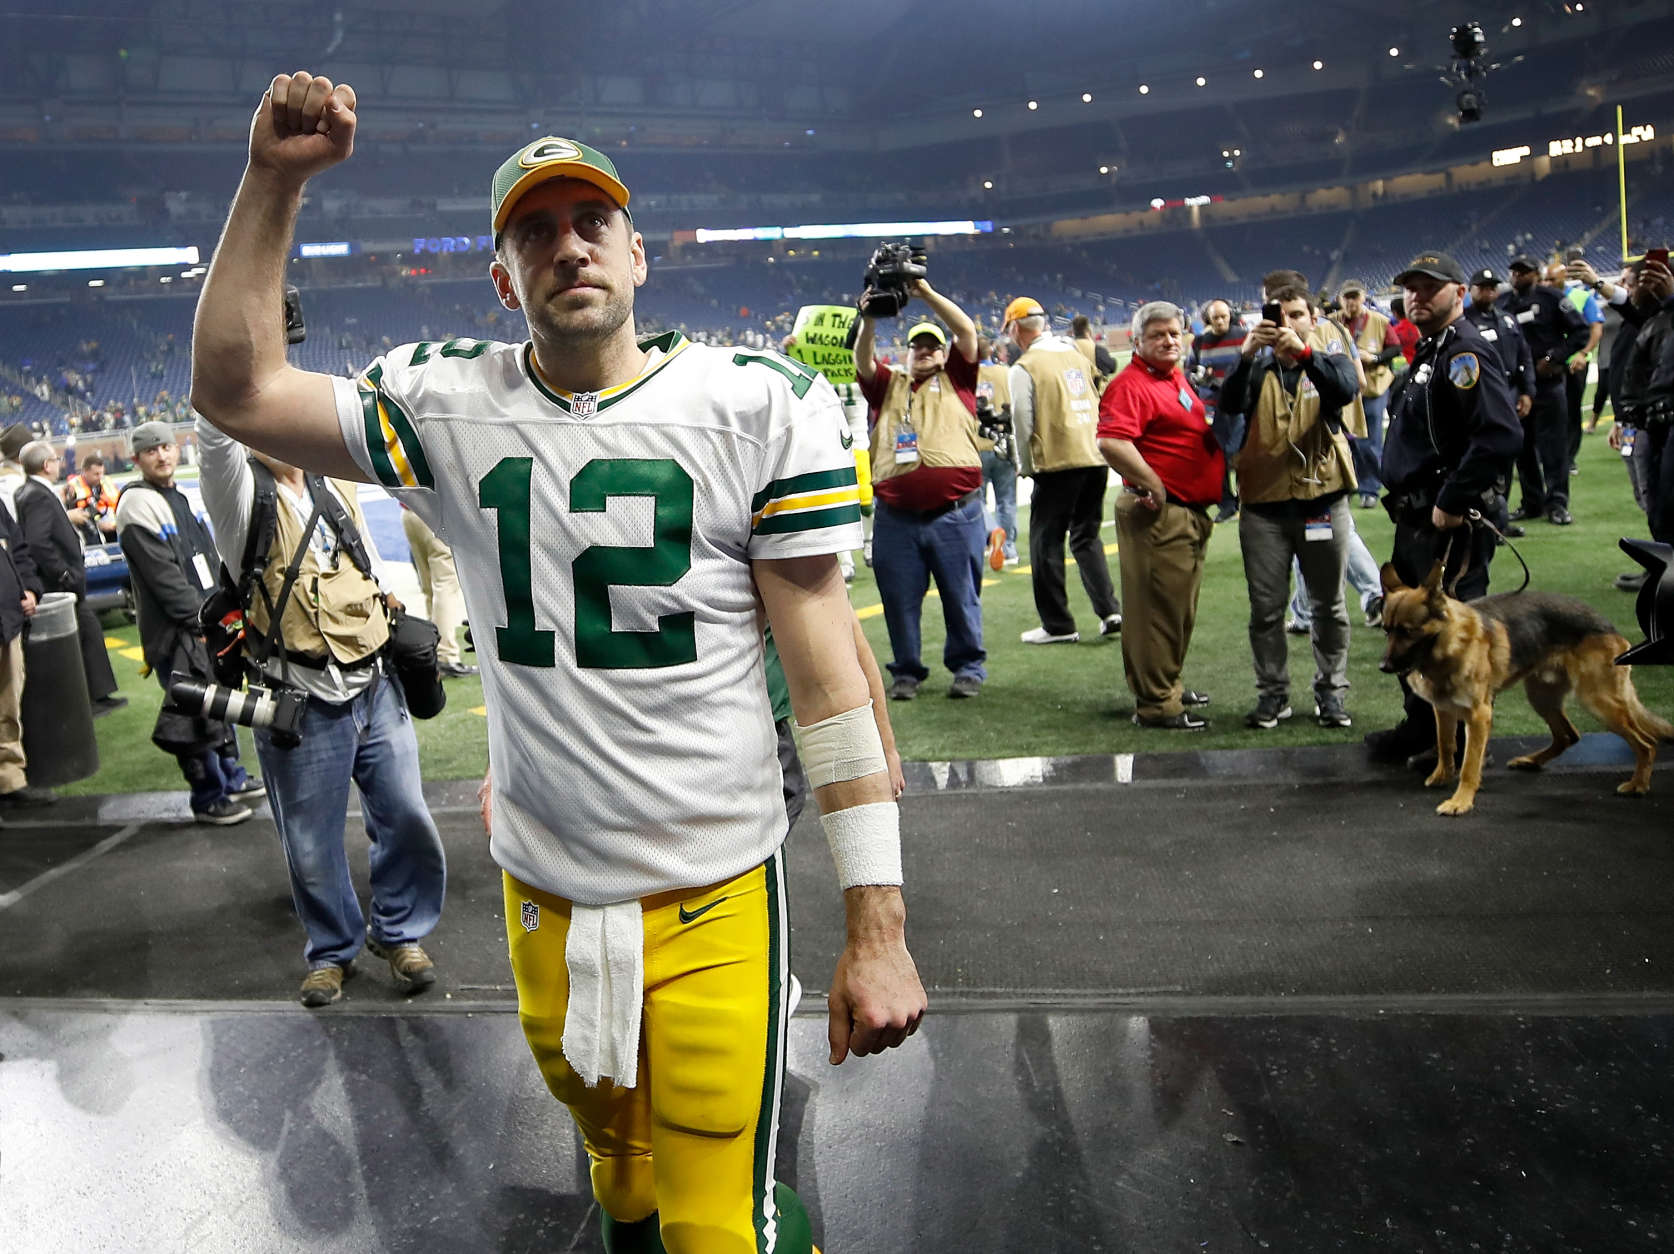 DETROIT, MI - JANUARY 1: Quarterback Aaron Rodgers #12 of the Green Bay Packers raises his fist as he leaves the field after defeating the Detroit Lions 31-24 at Ford Field on January 1, 2017 in Detroit, Michigan (Photo by Gregory Shamus/Getty Images)